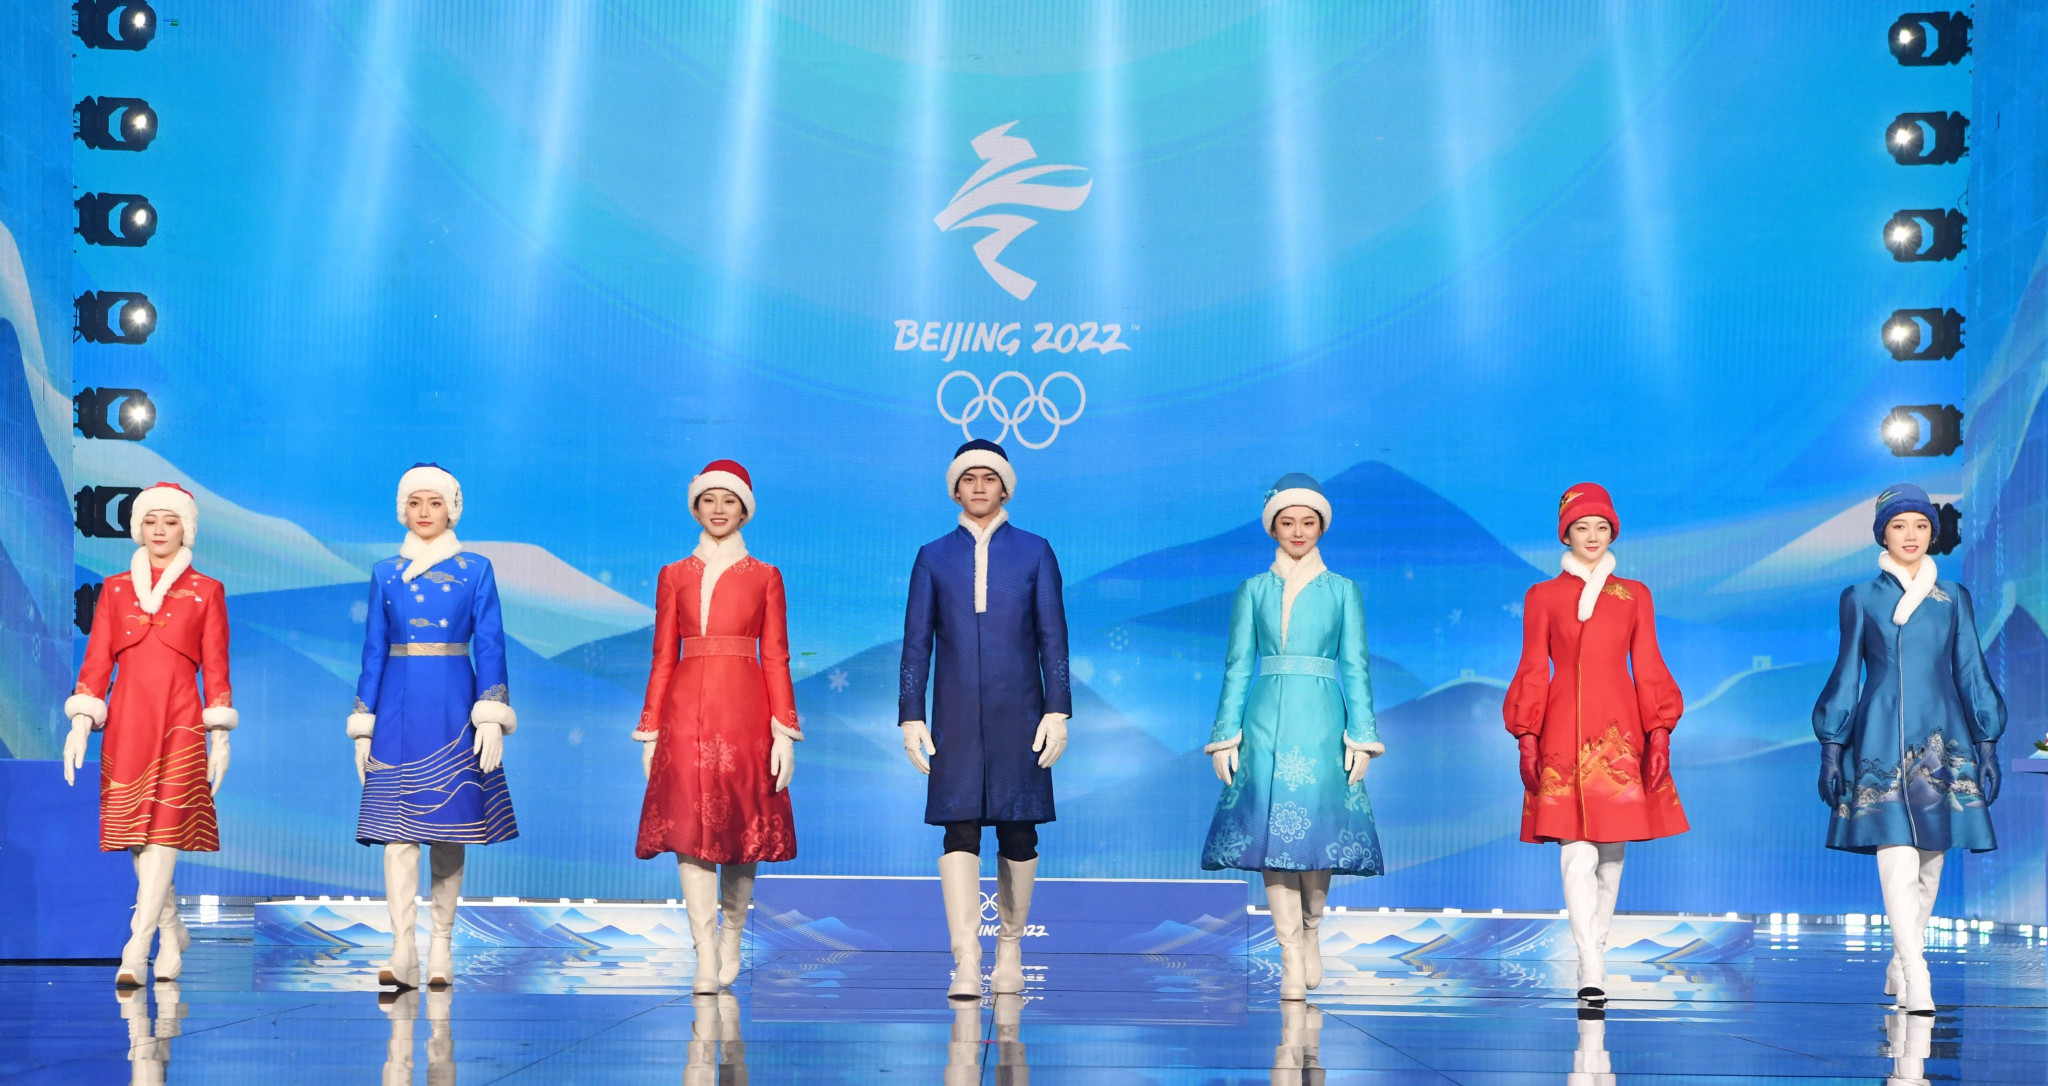 Beijing 2022 reveals uniforms for medal ceremonies heavily influenced by snow